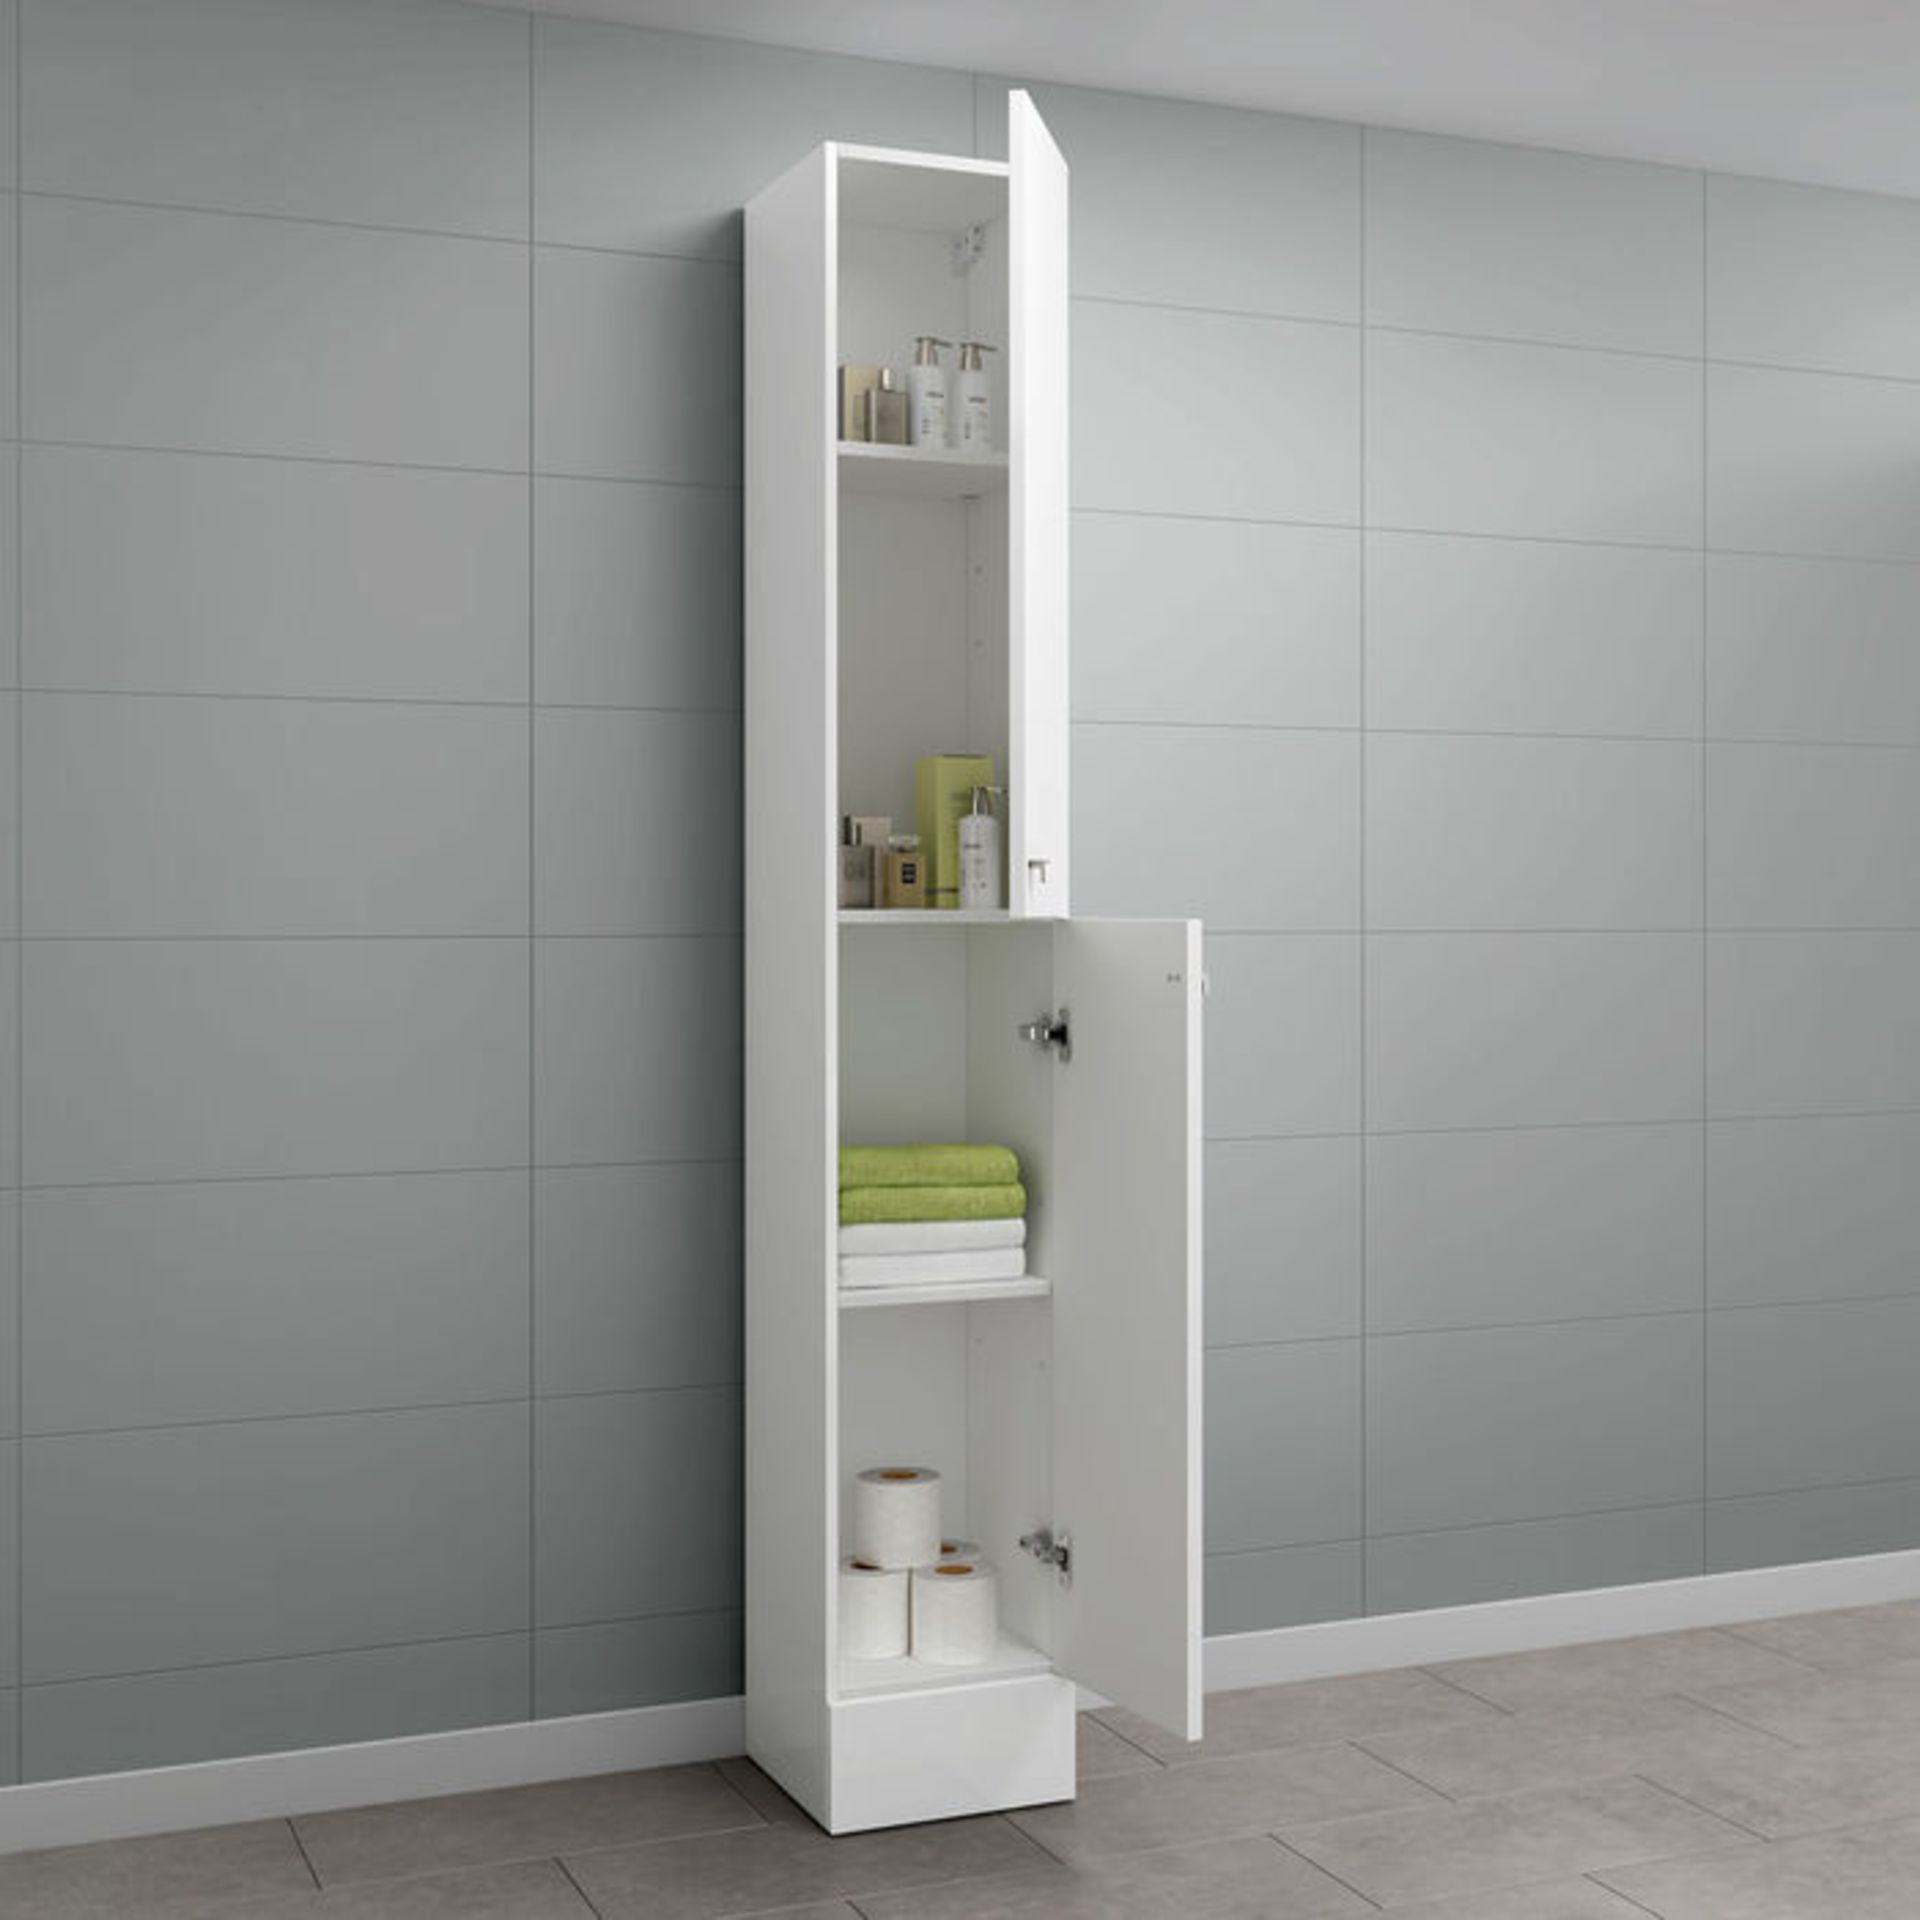 (ZA100) 1900x300mm Harper Gloss White Tall Storage Cabinet - Floor Standing. RRP £179.99. Our tall - Image 3 of 5